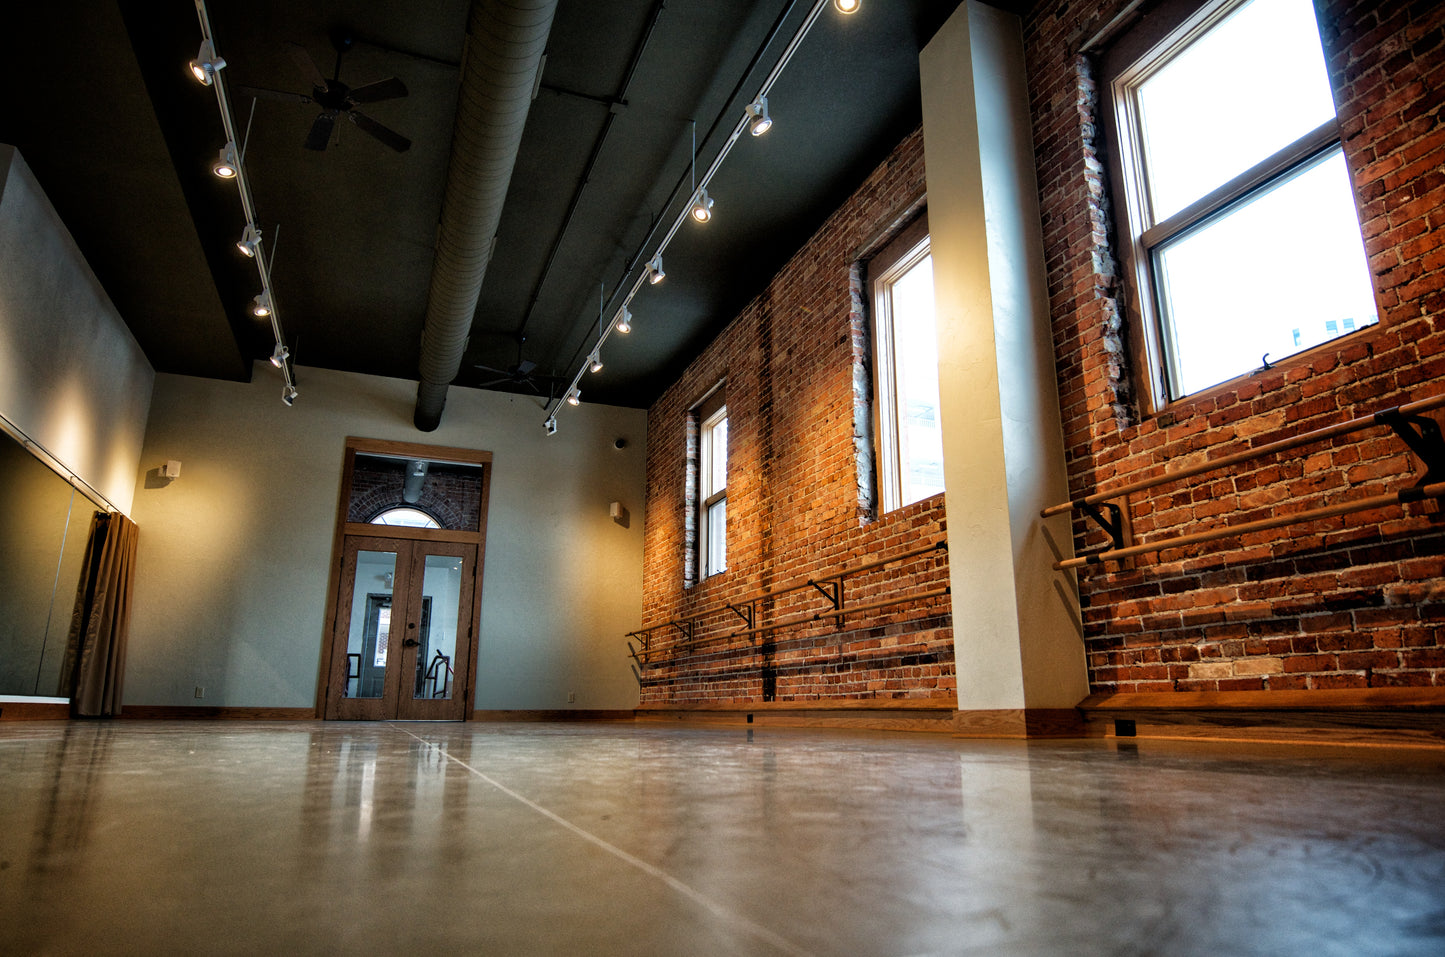 Studio Rental for Dance and Photography